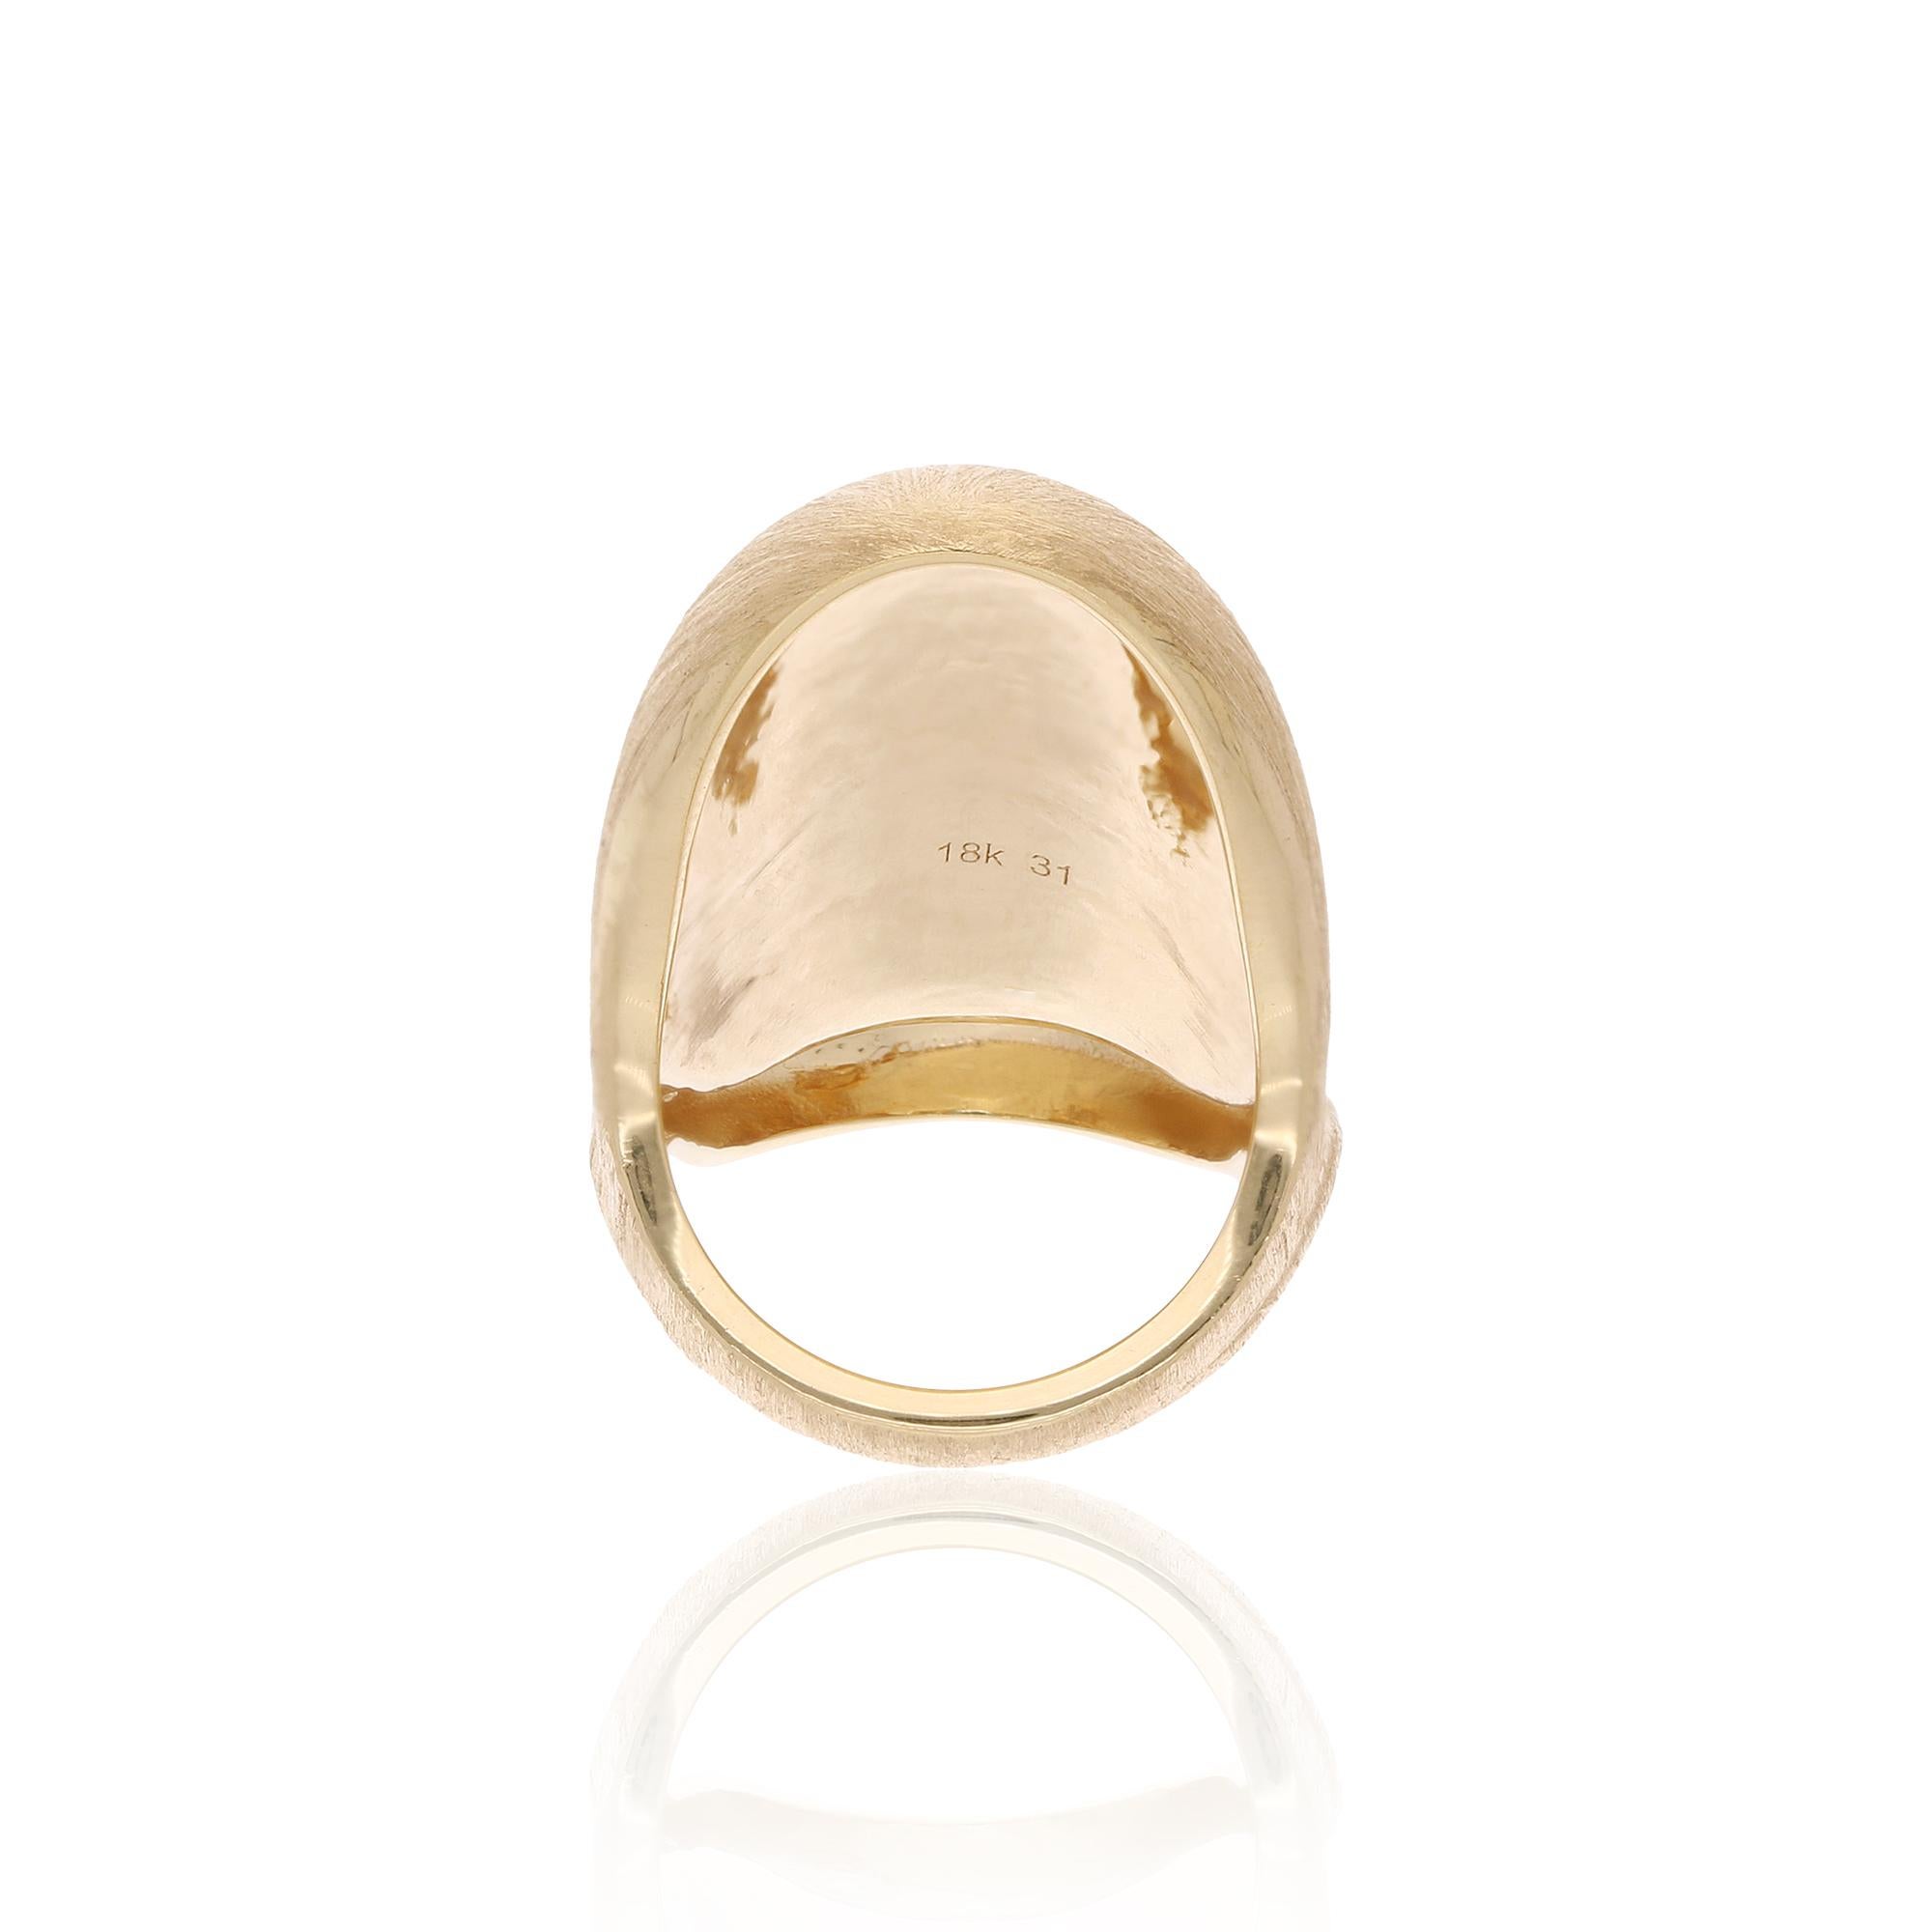 Item Code :- SER-23463
Gross Wt. :- 13.52 gm
18k Yellow Gold Wt. :- 13.52 gm
Ring Size :- 7 US & All size available

✦ Sizing
.....................
We can adjust most items to fit your sizing preferences. Most items can be made to any size and